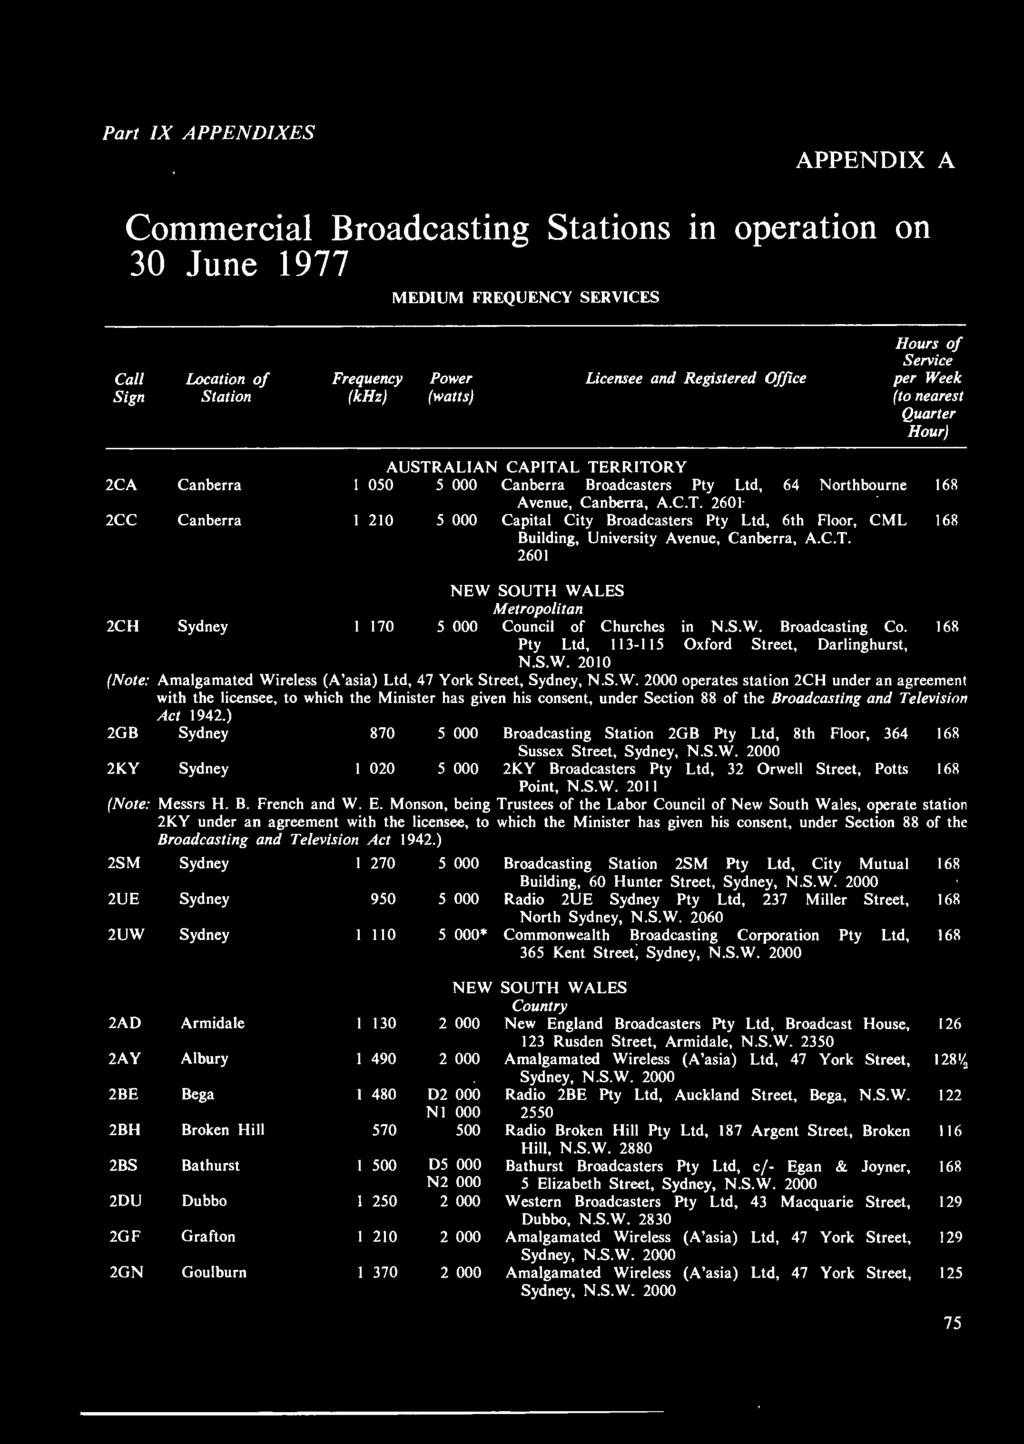 C.T. 0 CH KY Sydney 70 NEW SOUTH WALES Metropolitan 000 Council of Churches Pty Ltd, - N.S.W. 00 in N.S.W. Broadcasting Co.